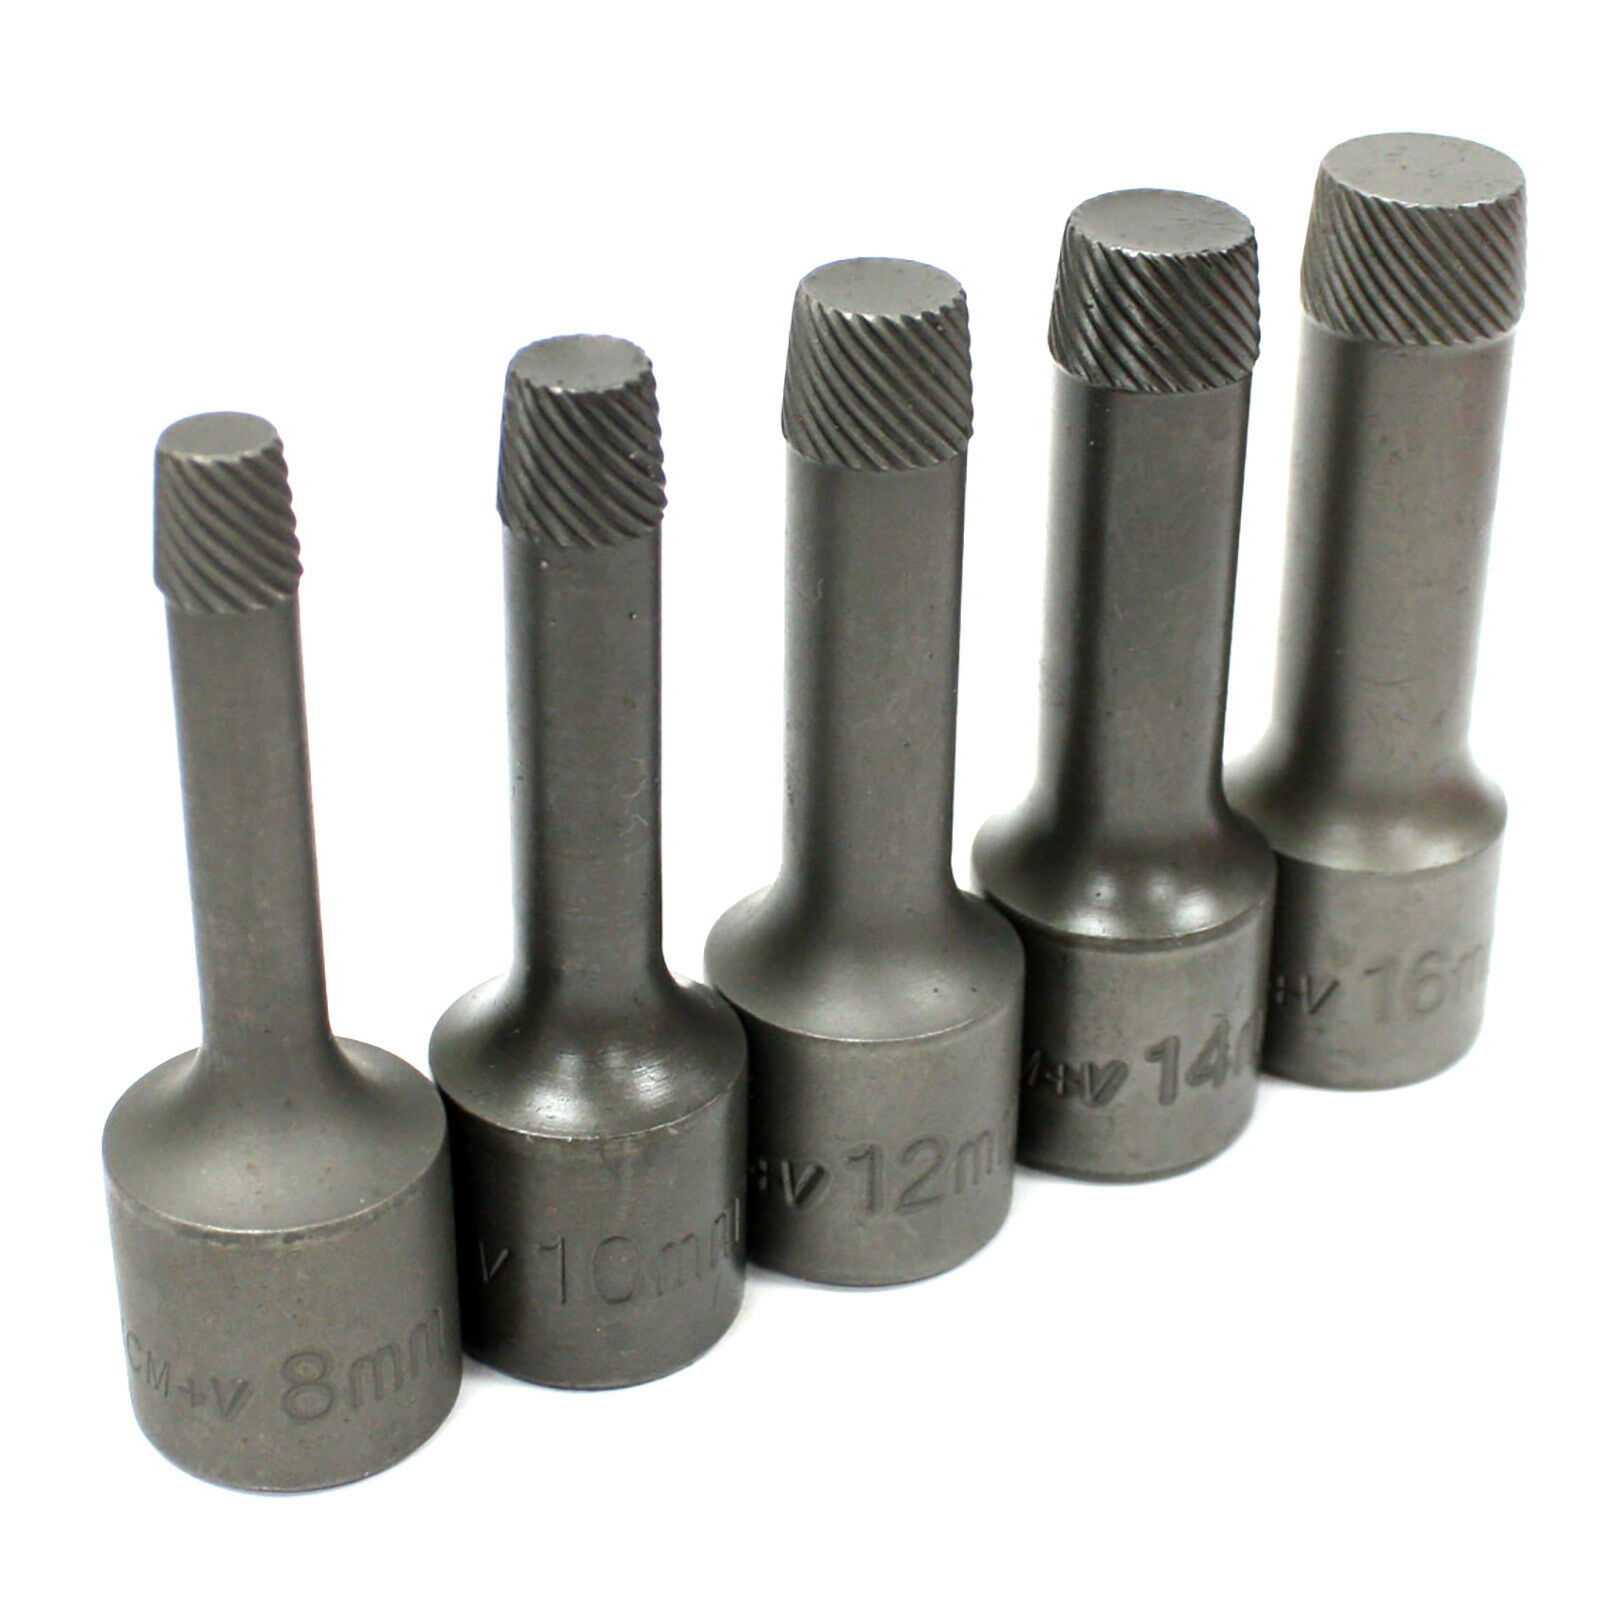 9-19mm S-TS10 10pc Nut Bolt Remover Extractor Set Damage Broken Screw Removal 